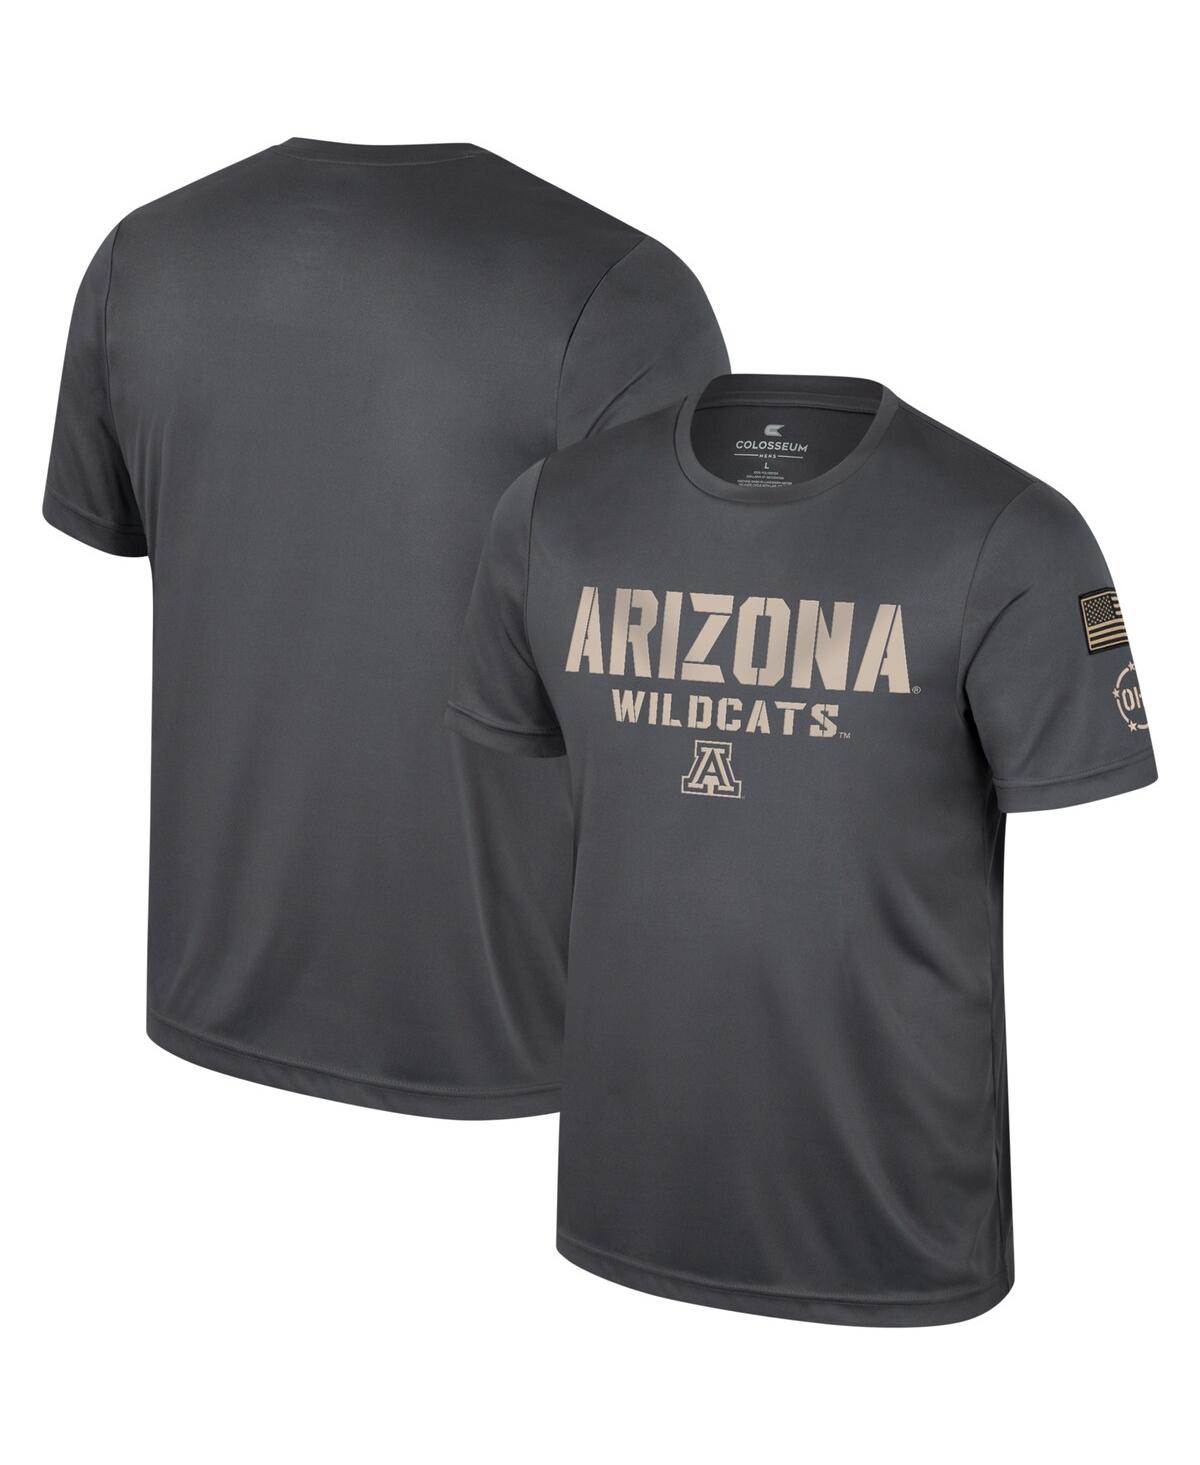 Men's Colosseum Charcoal Arizona Wildcats Oht Military-Inspired Appreciation T-shirt - Charcoal